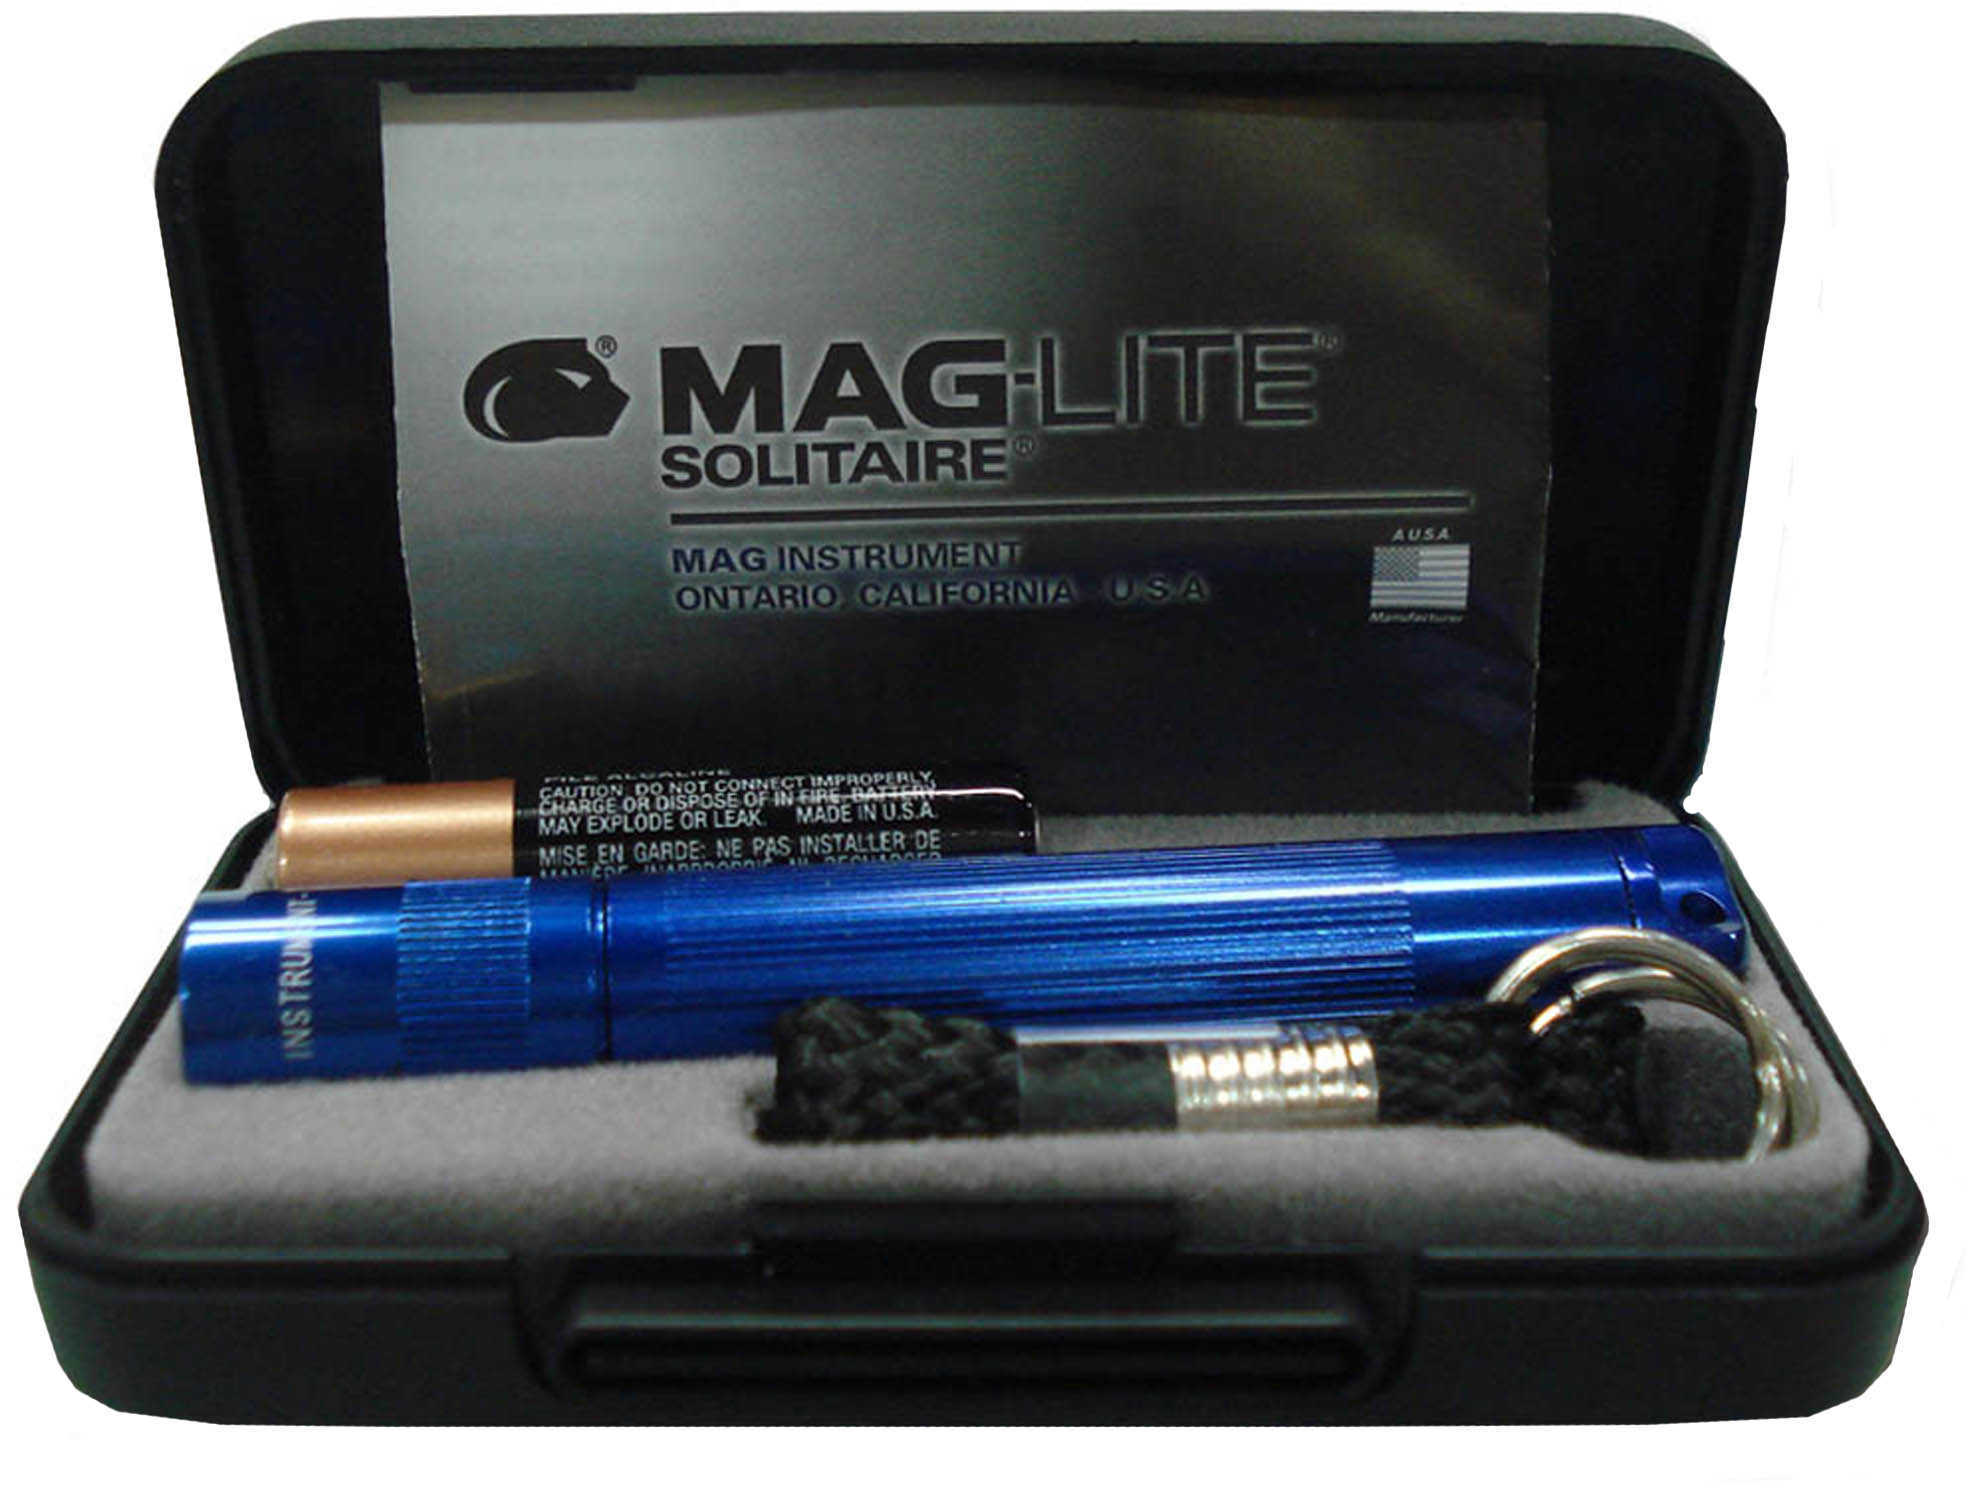 Maglite Solitaire Flashlight AAA in Presentation Box (Blue) K3A112